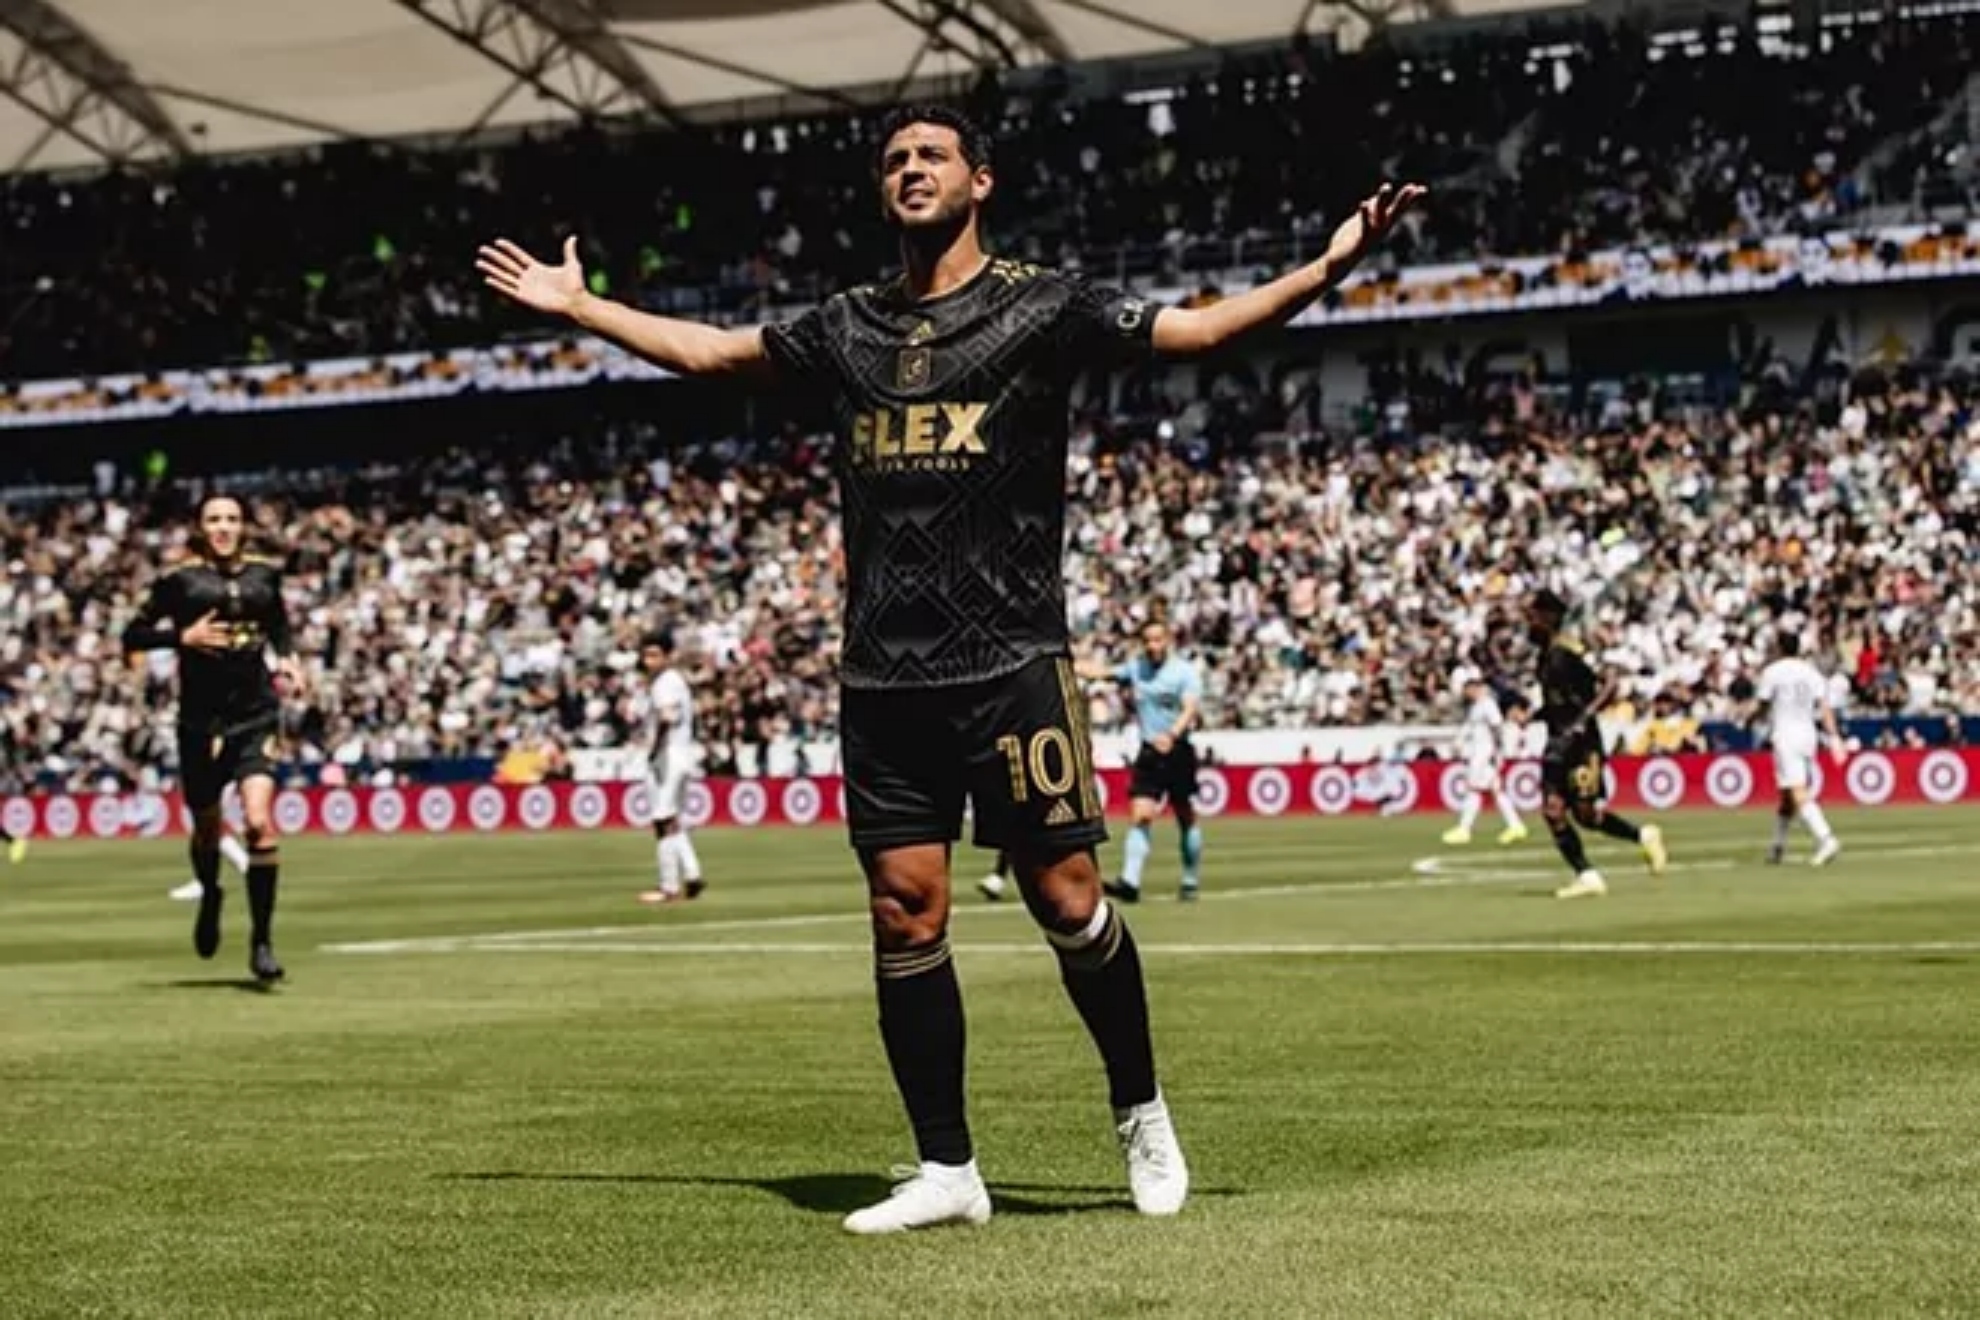 Carlos Vela's LAFC take home the win at "El Tráfico" against a troubled LA Galaxy